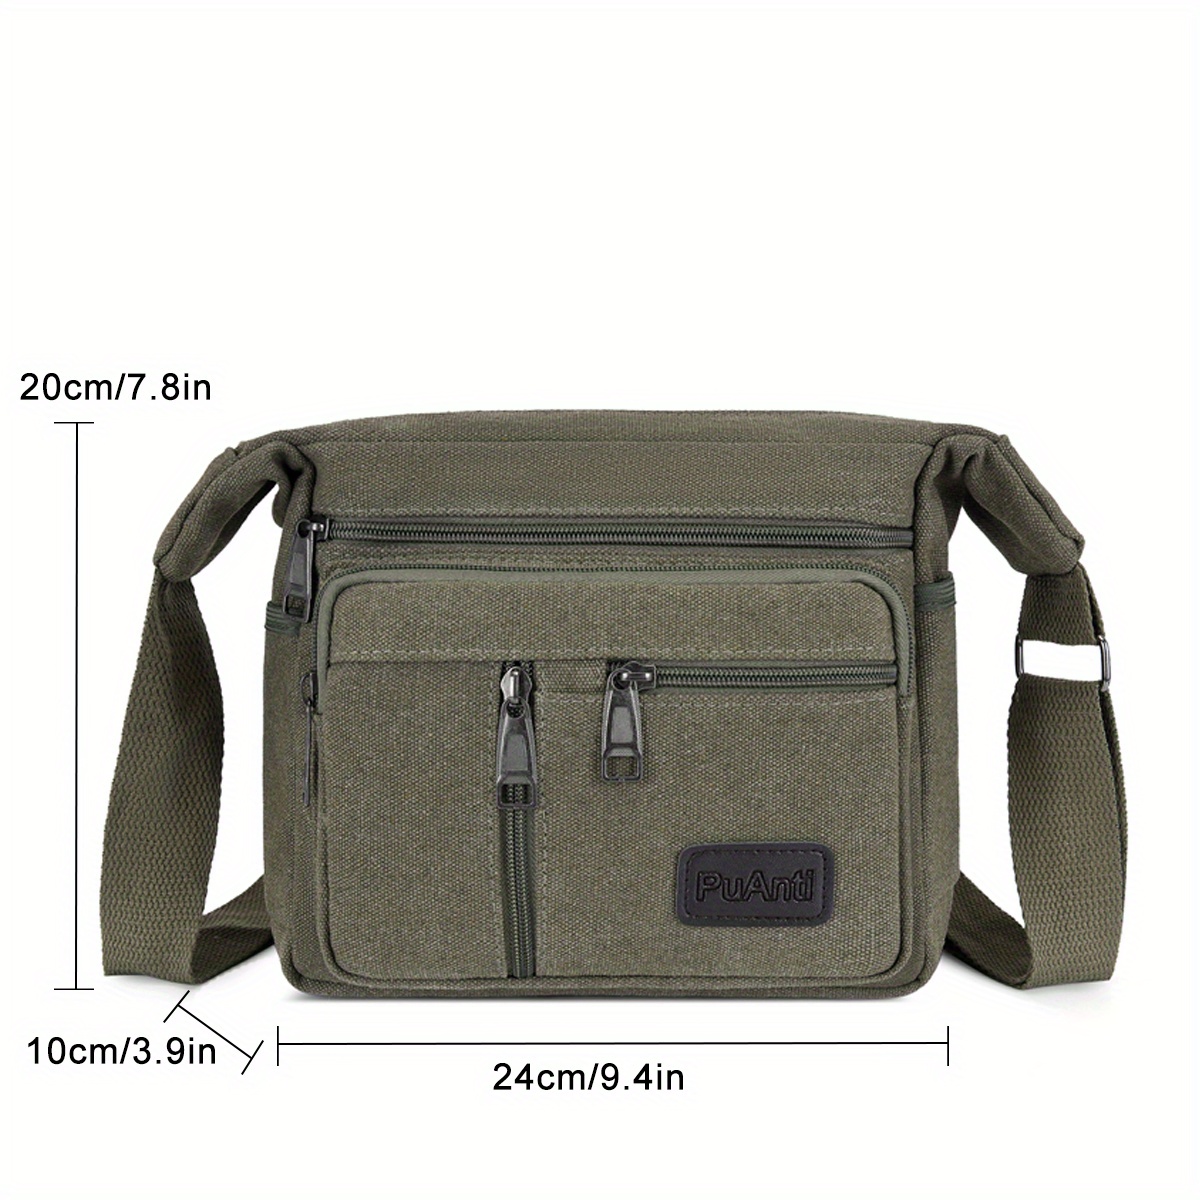 Men's Canvas Messenger Bag With Multiple Pockets, Large Capacity